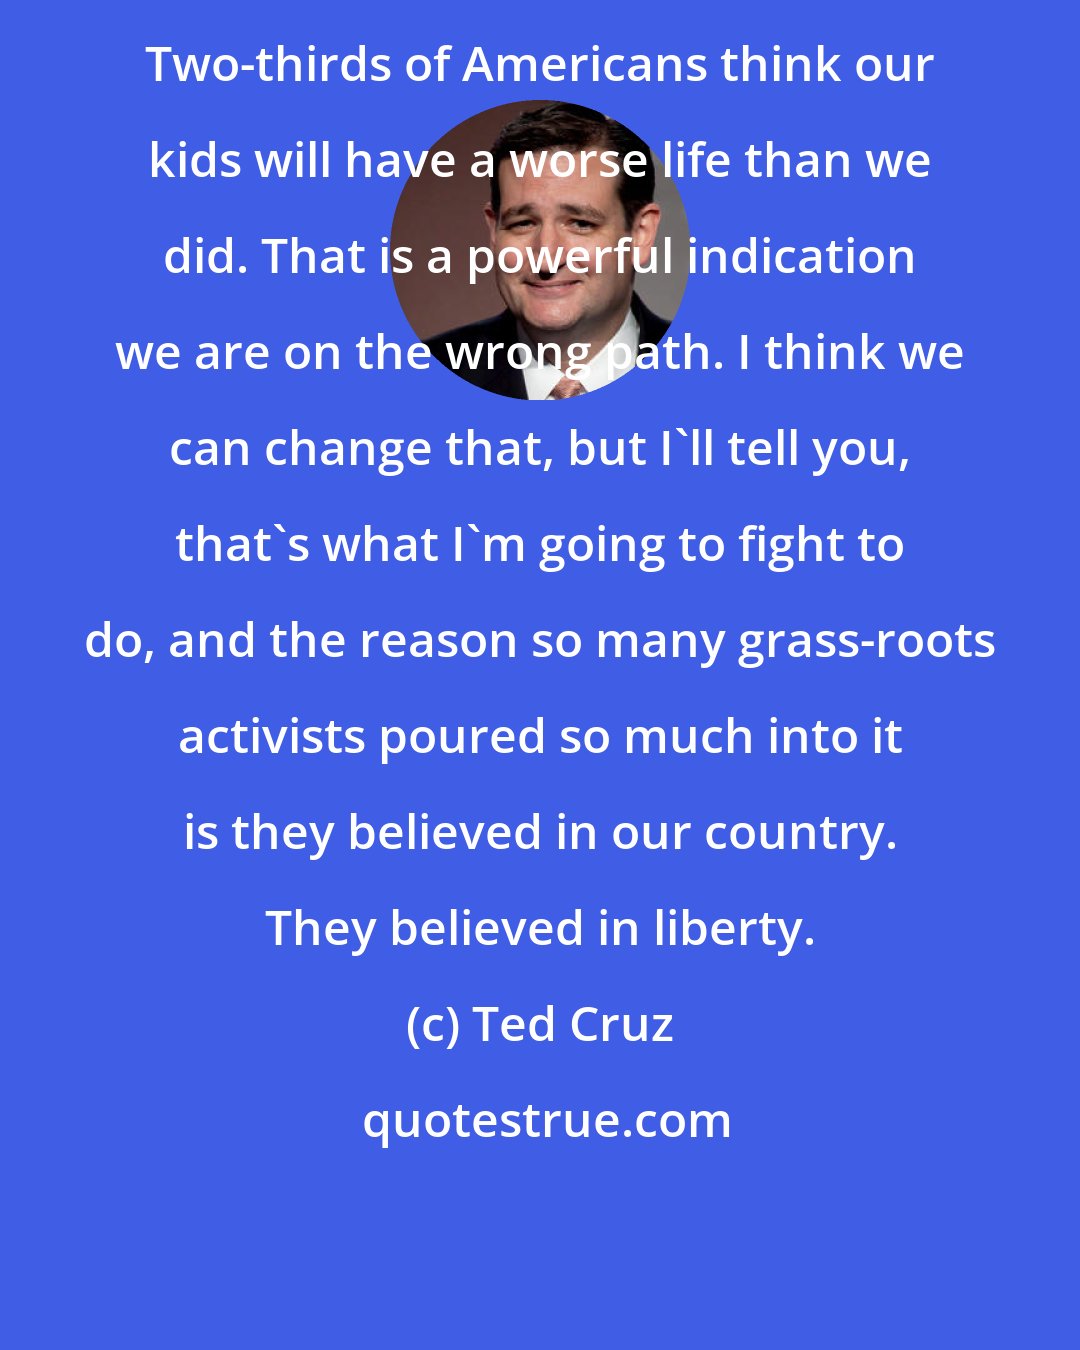 Ted Cruz: Two-thirds of Americans think our kids will have a worse life than we did. That is a powerful indication we are on the wrong path. I think we can change that, but I'll tell you, that's what I'm going to fight to do, and the reason so many grass-roots activists poured so much into it is they believed in our country. They believed in liberty.